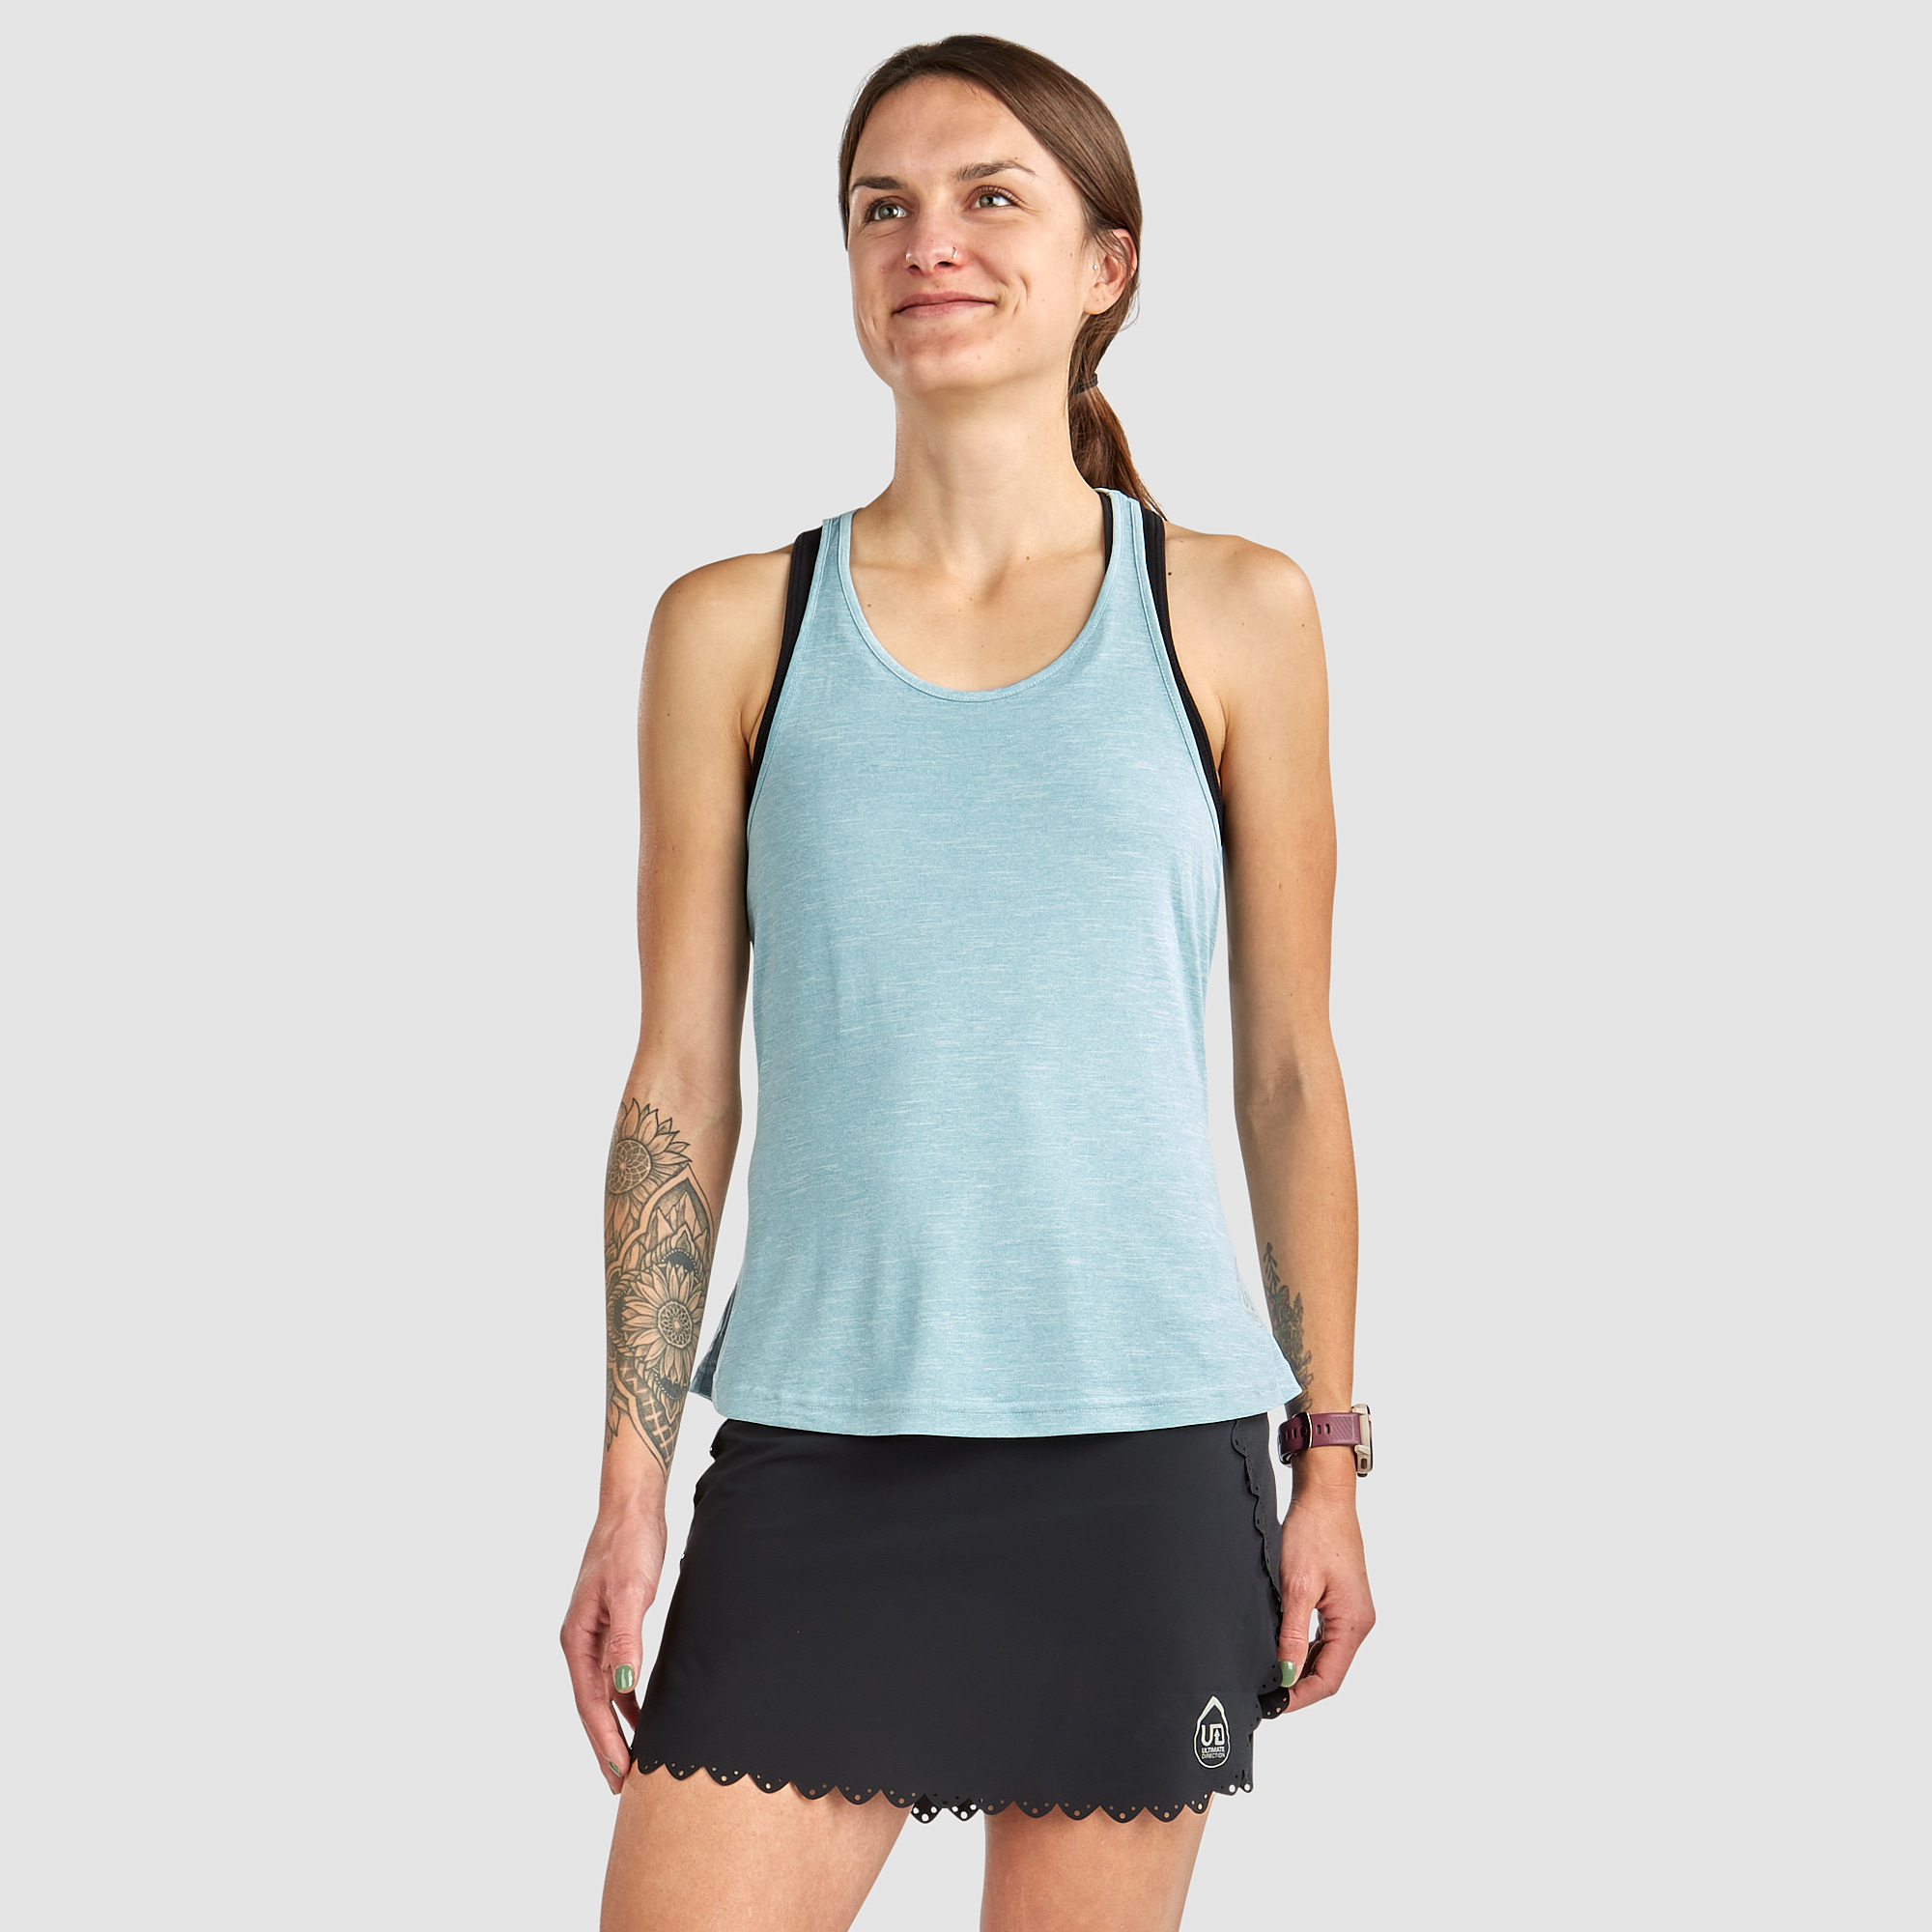 Ultimate Direction Women's Contralis Tank Top in Sea Blue Size XS